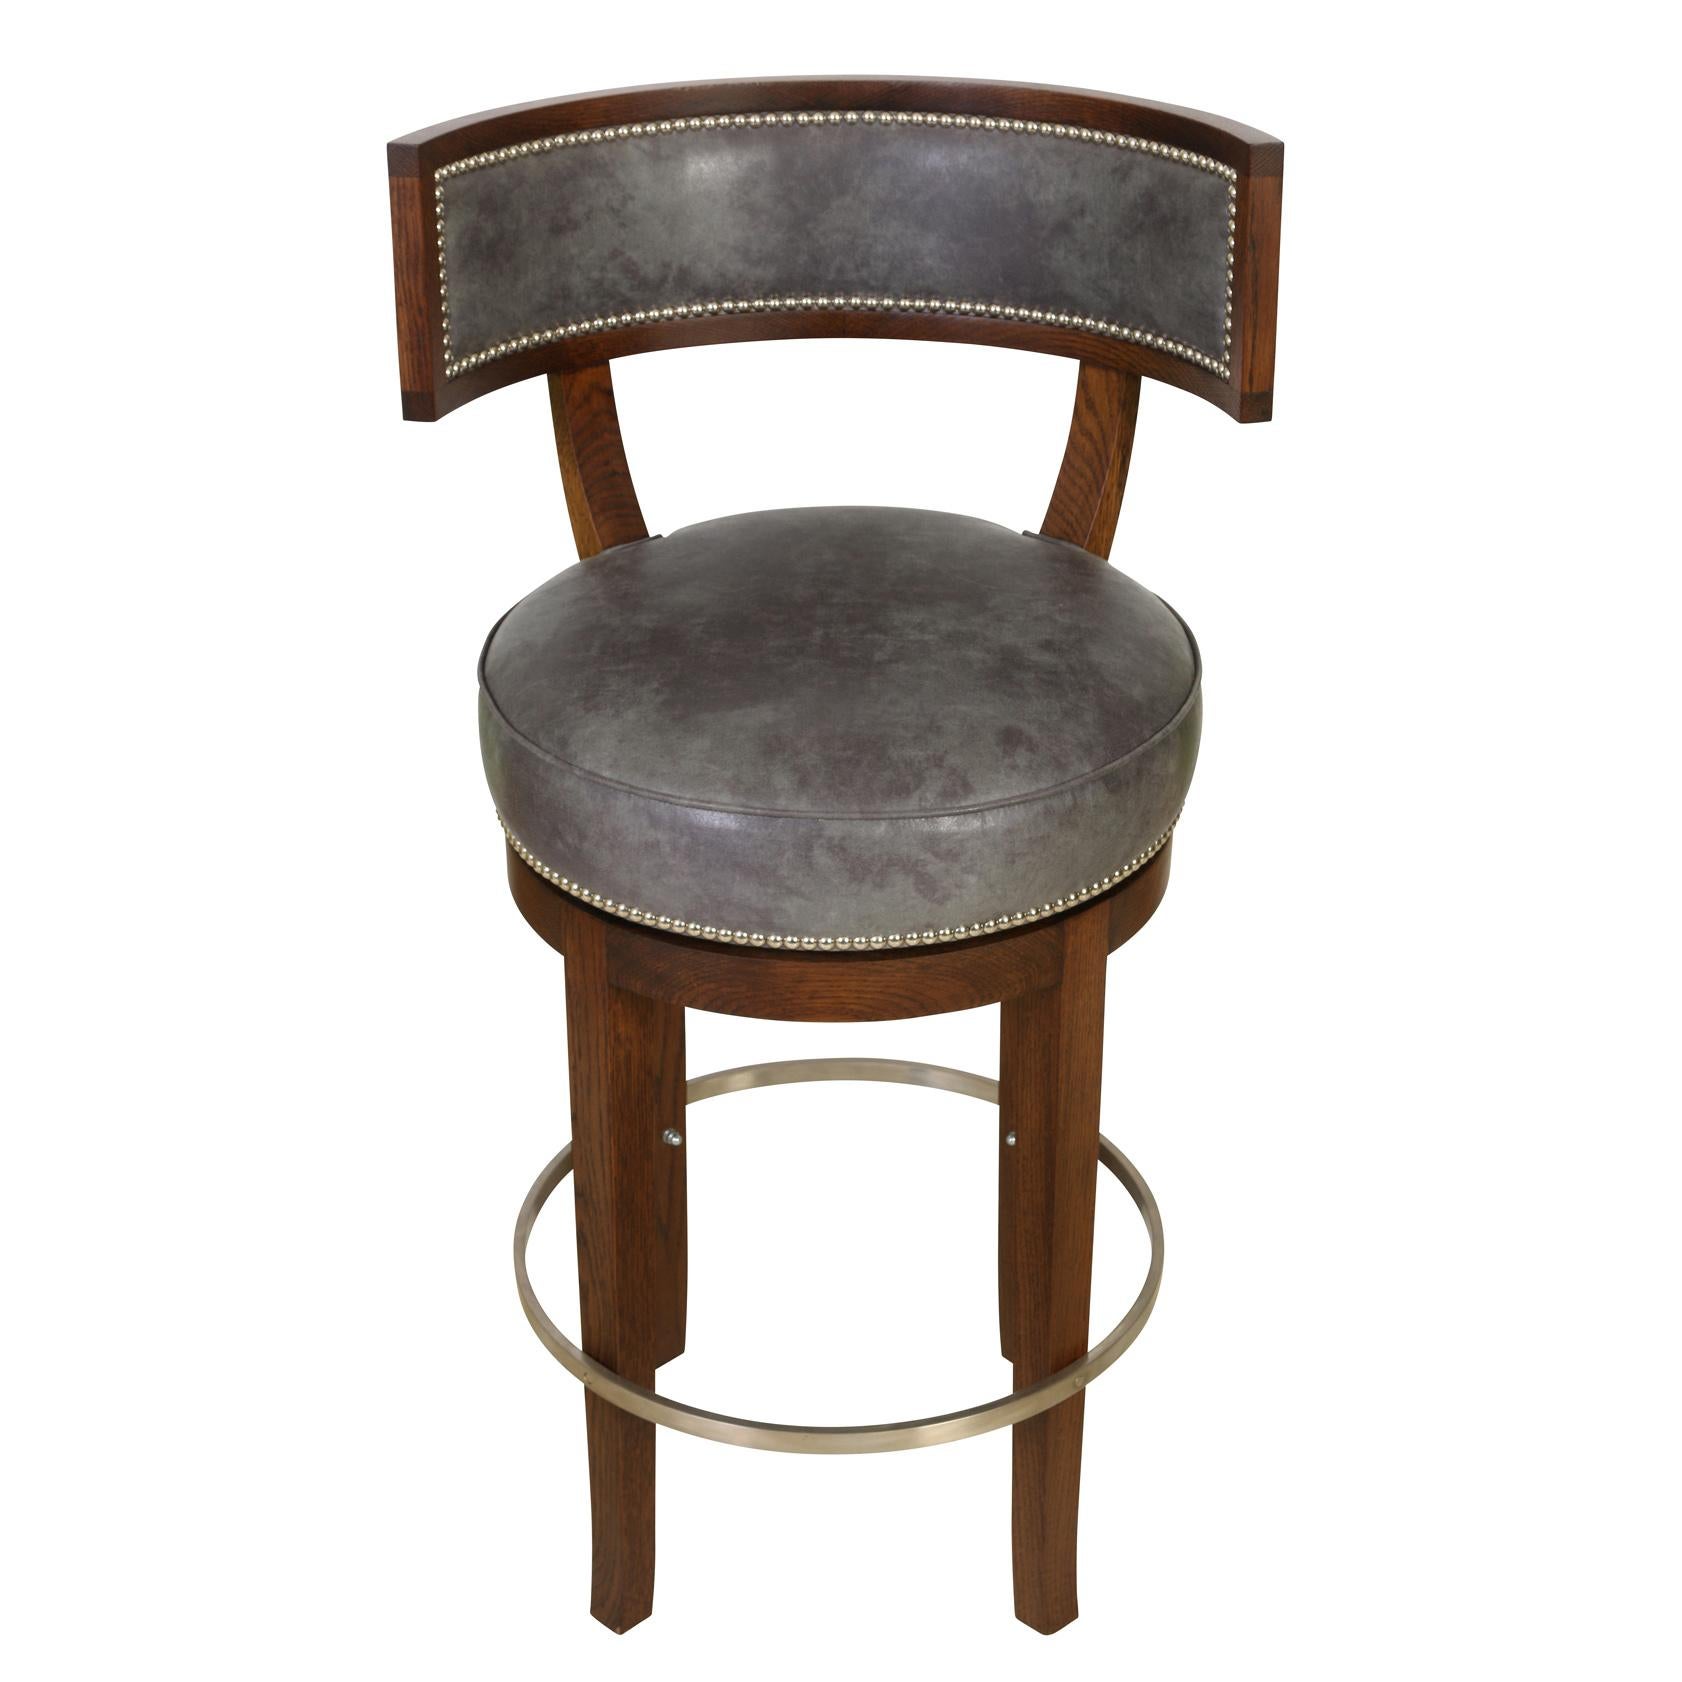 A set of five Soane bar stools in blue leather with nail head trim, curved back and metal ring stretcher. Seats swivel.